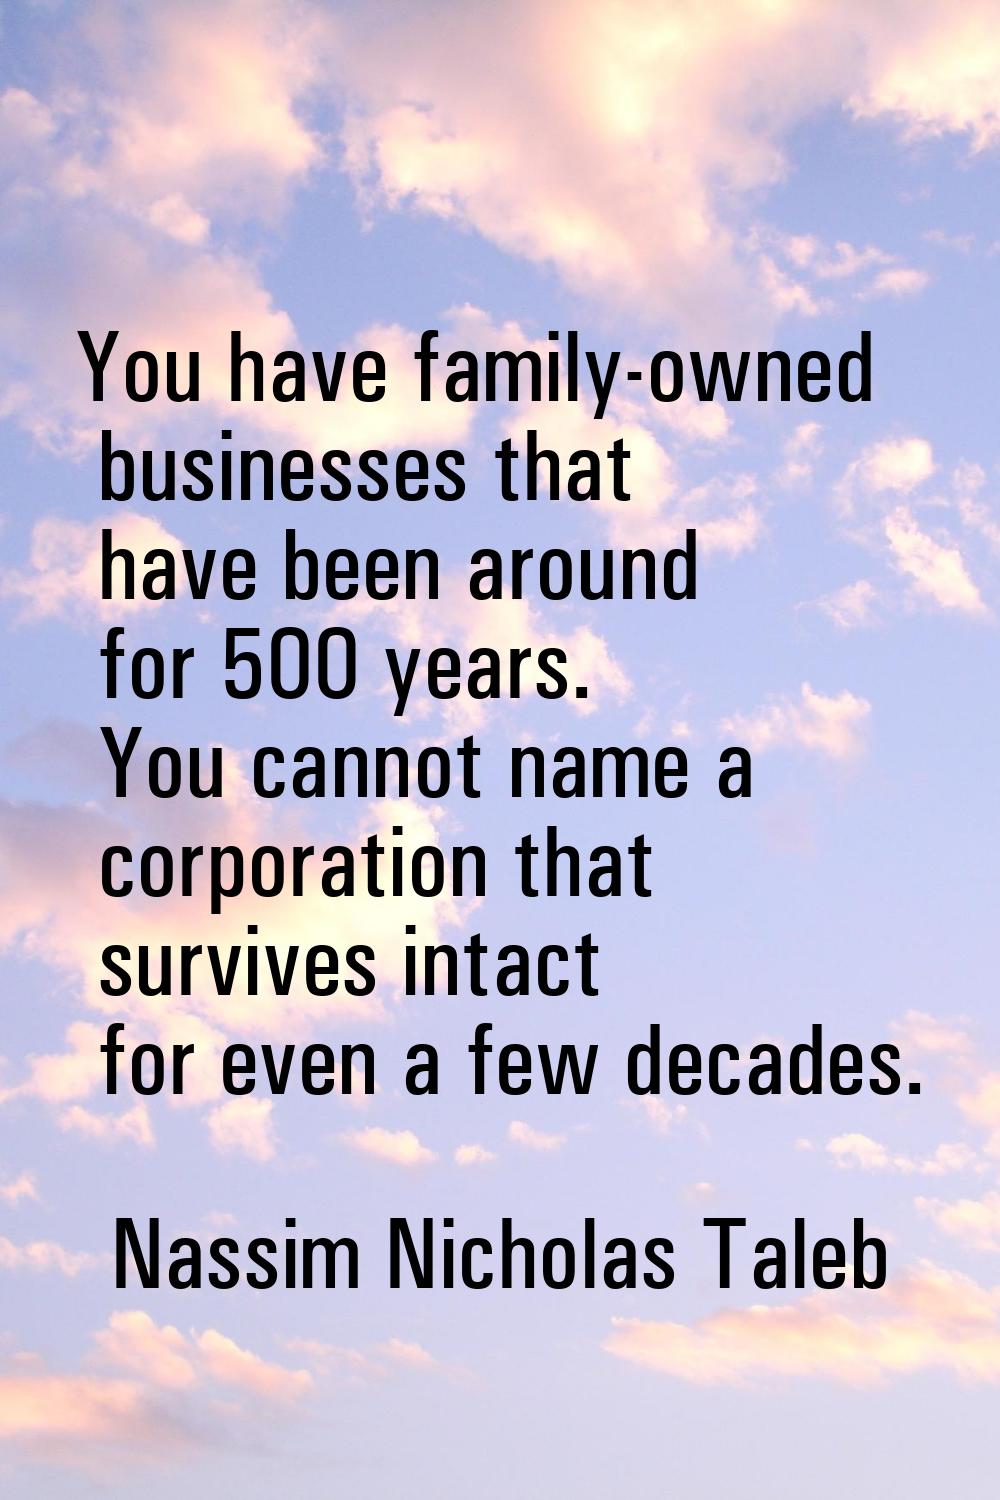 You have family-owned businesses that have been around for 500 years. You cannot name a corporation